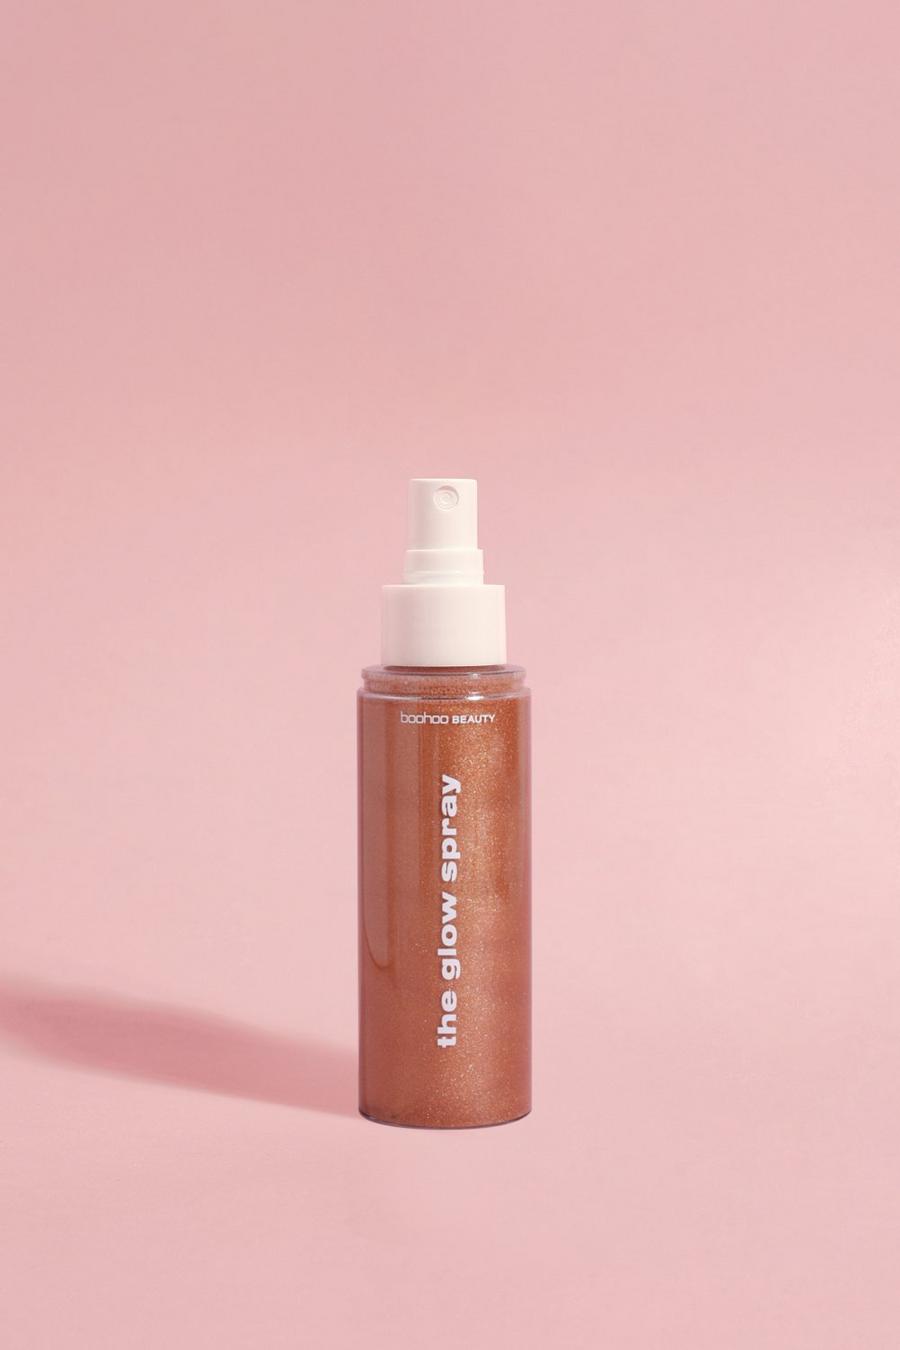 Boohoo Beauty - Spray fixateur ultra glow, Rose gold image number 1